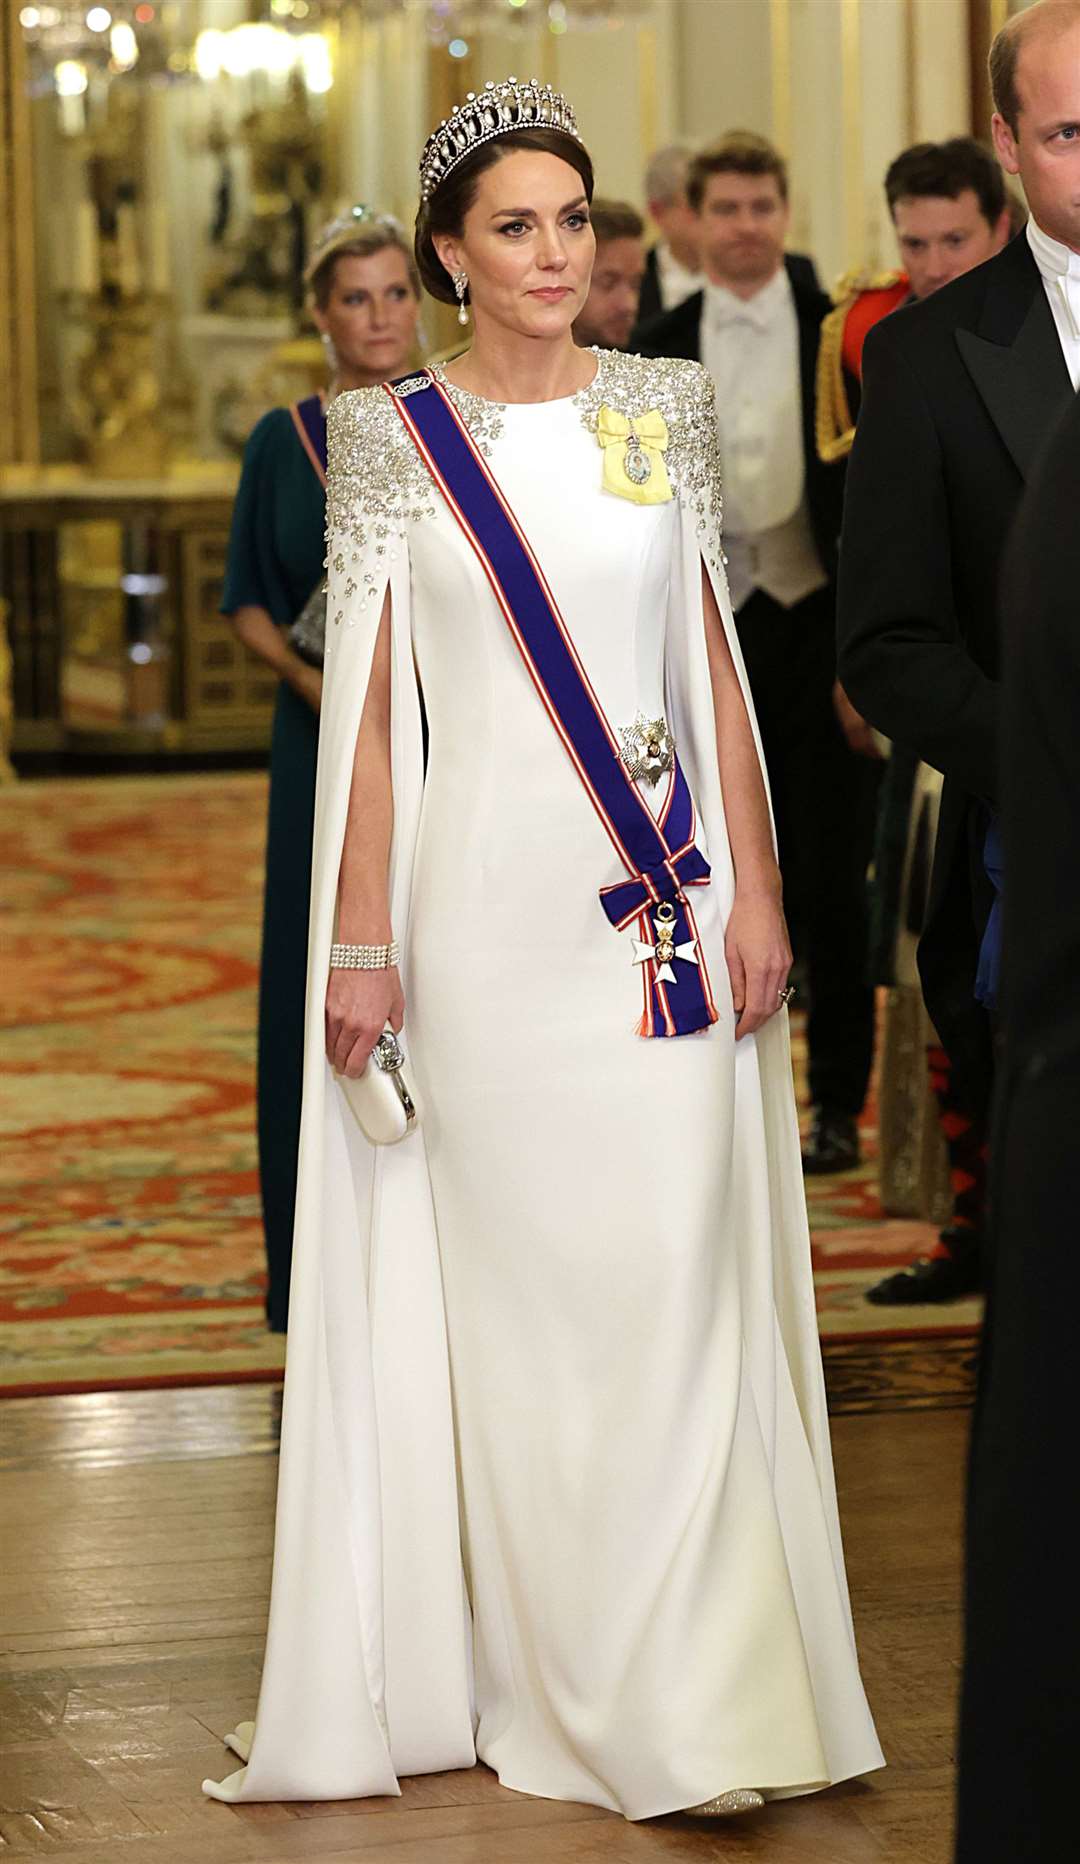 The Princess of Wales at the South African state banquet at Buckingham Palace in November 2022 (Chris Jackson/PA)